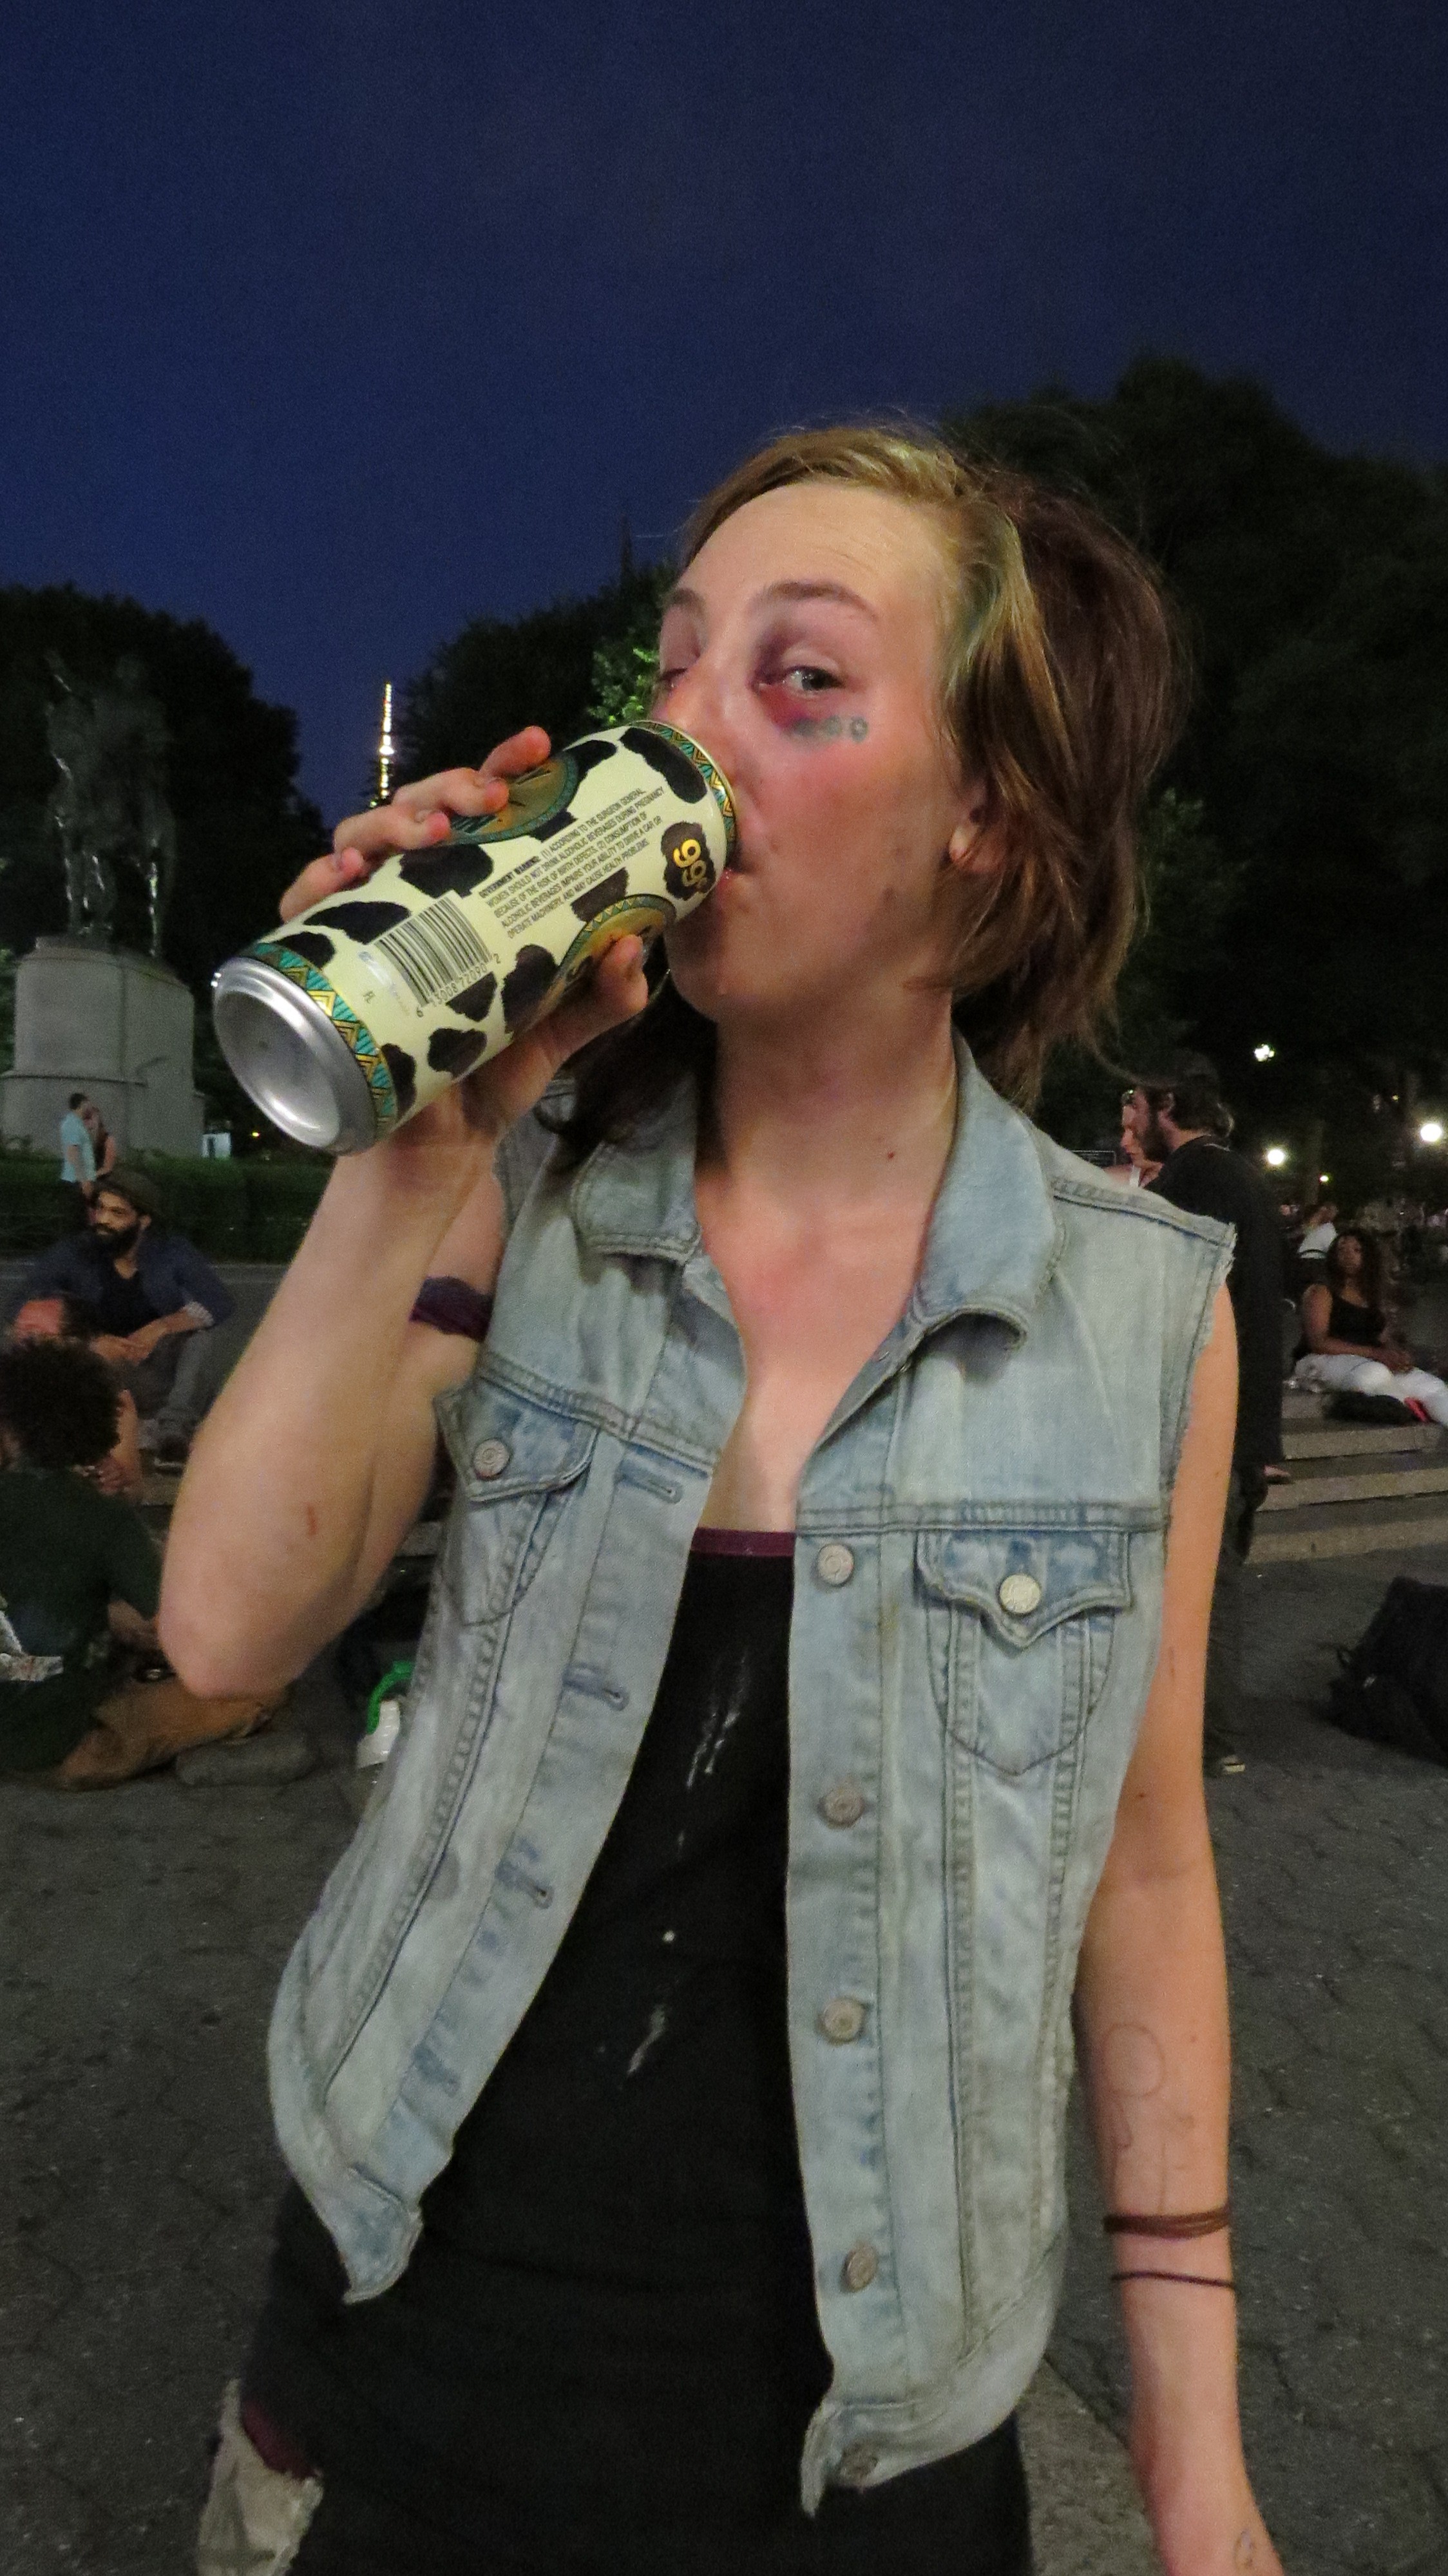 crusty girl with beer